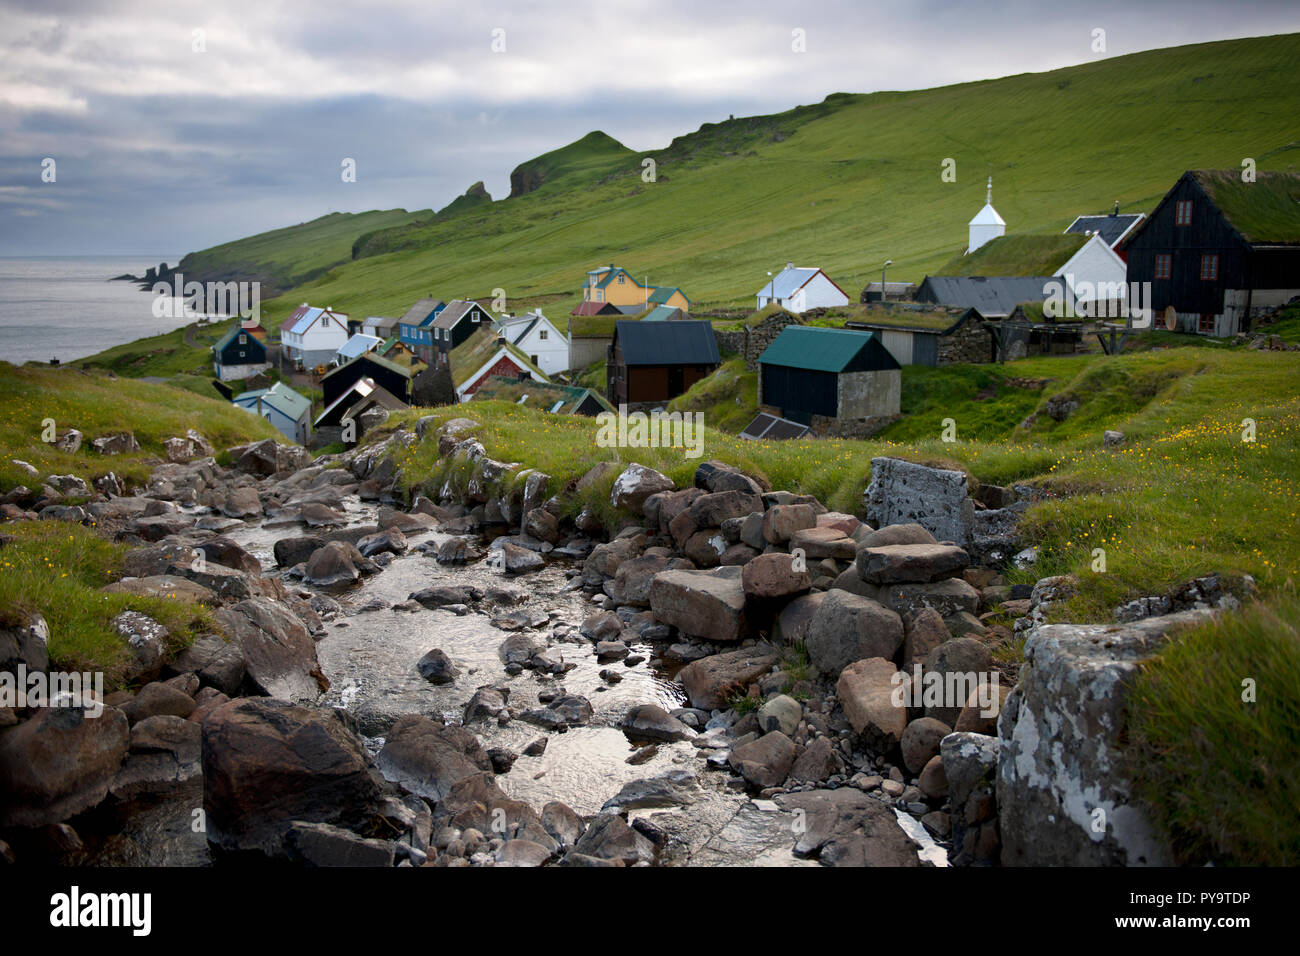 Houses and stream in the village of the Island Mykines, Faroe Islands Stock Photo